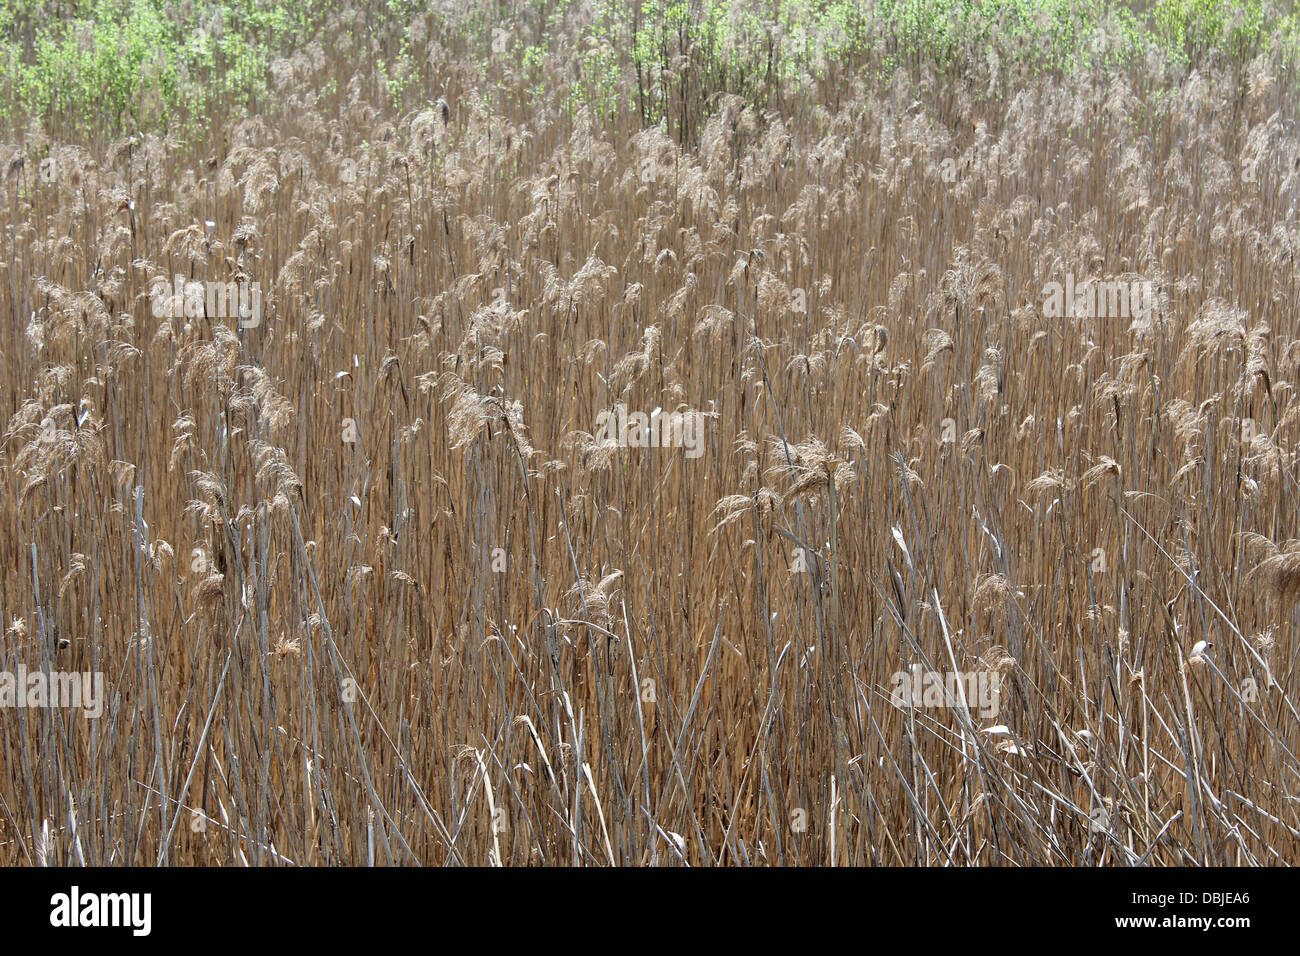 image of thicket of phragmites near the mire Stock Photo